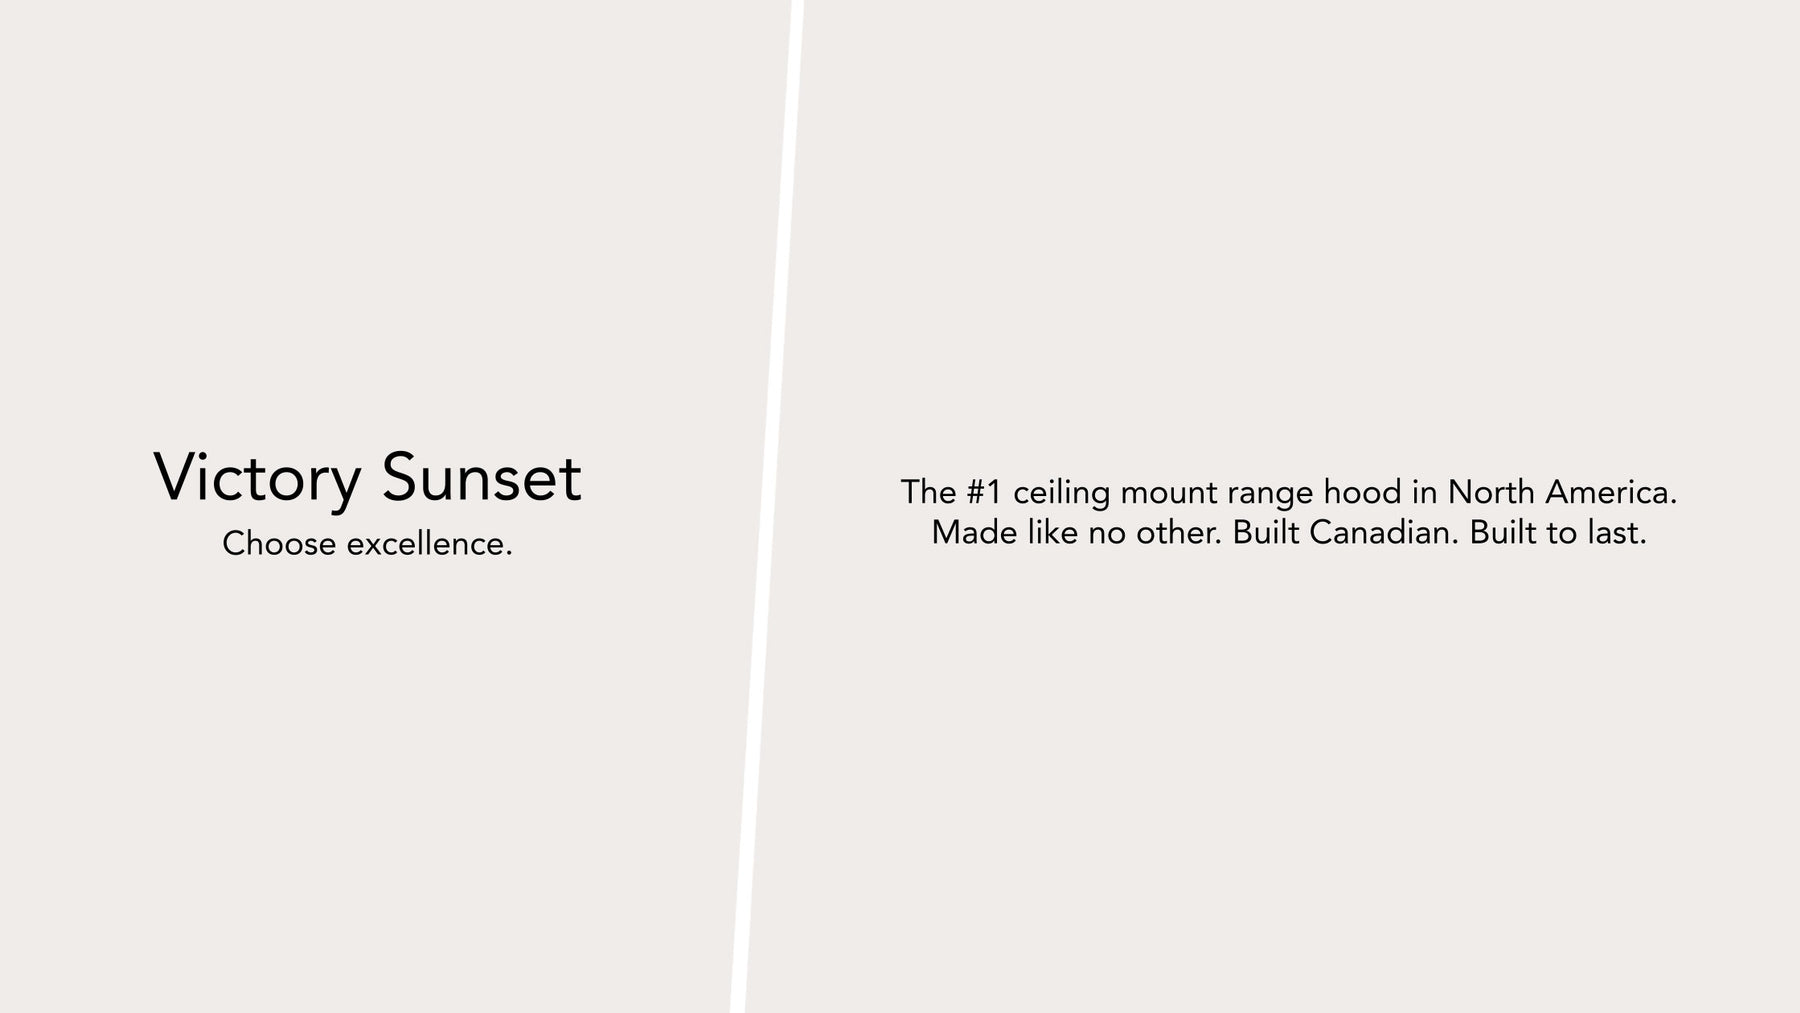 What is a Flush Ceiling Mount Range Hood? Why Victory Sunset?